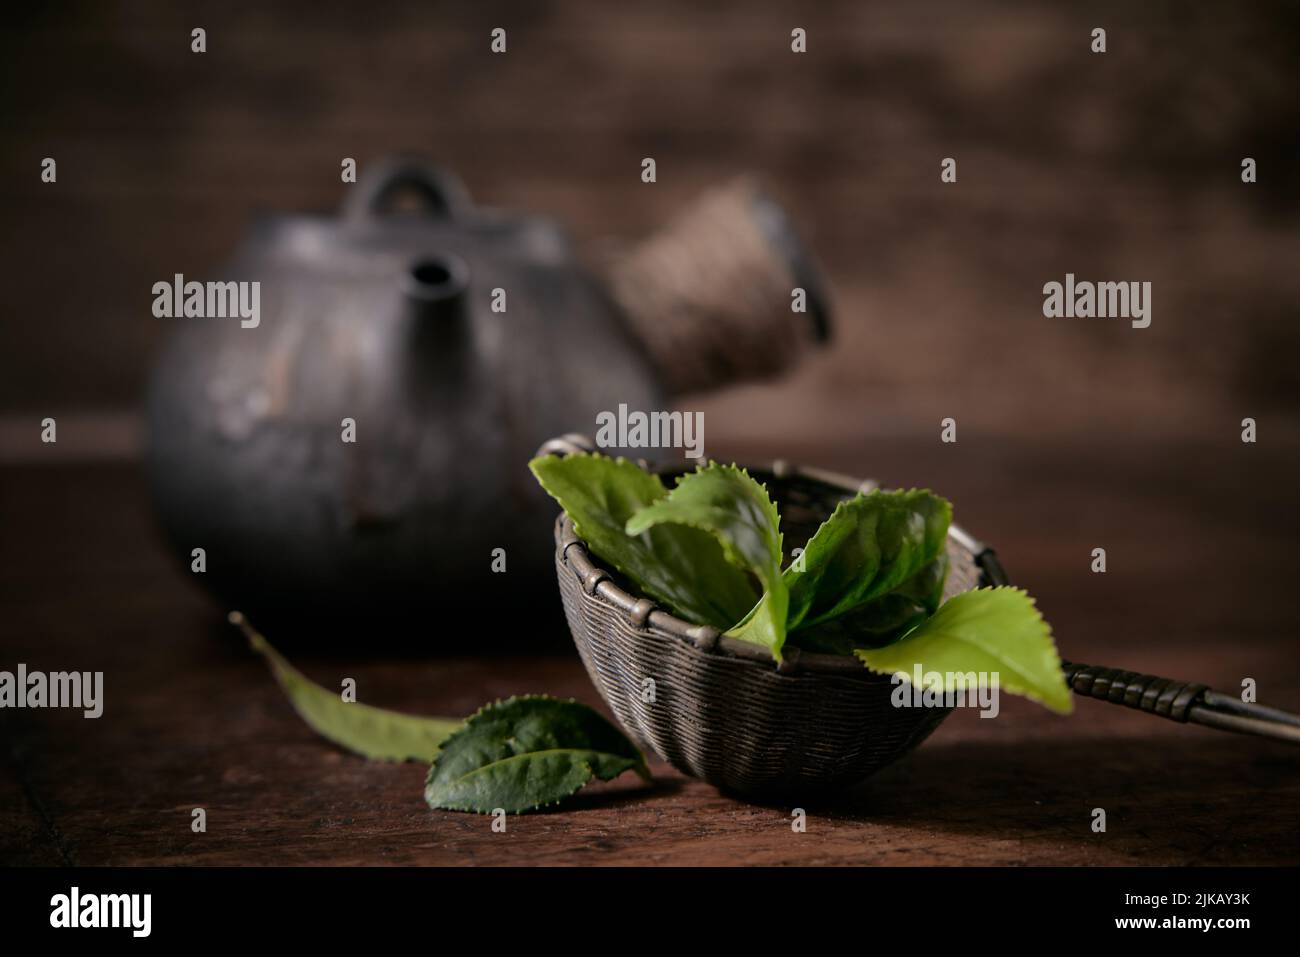 Fresh green tea leaves in ladle placed on table near old fashioned metal teapot on blurred background in light room Stock Photo